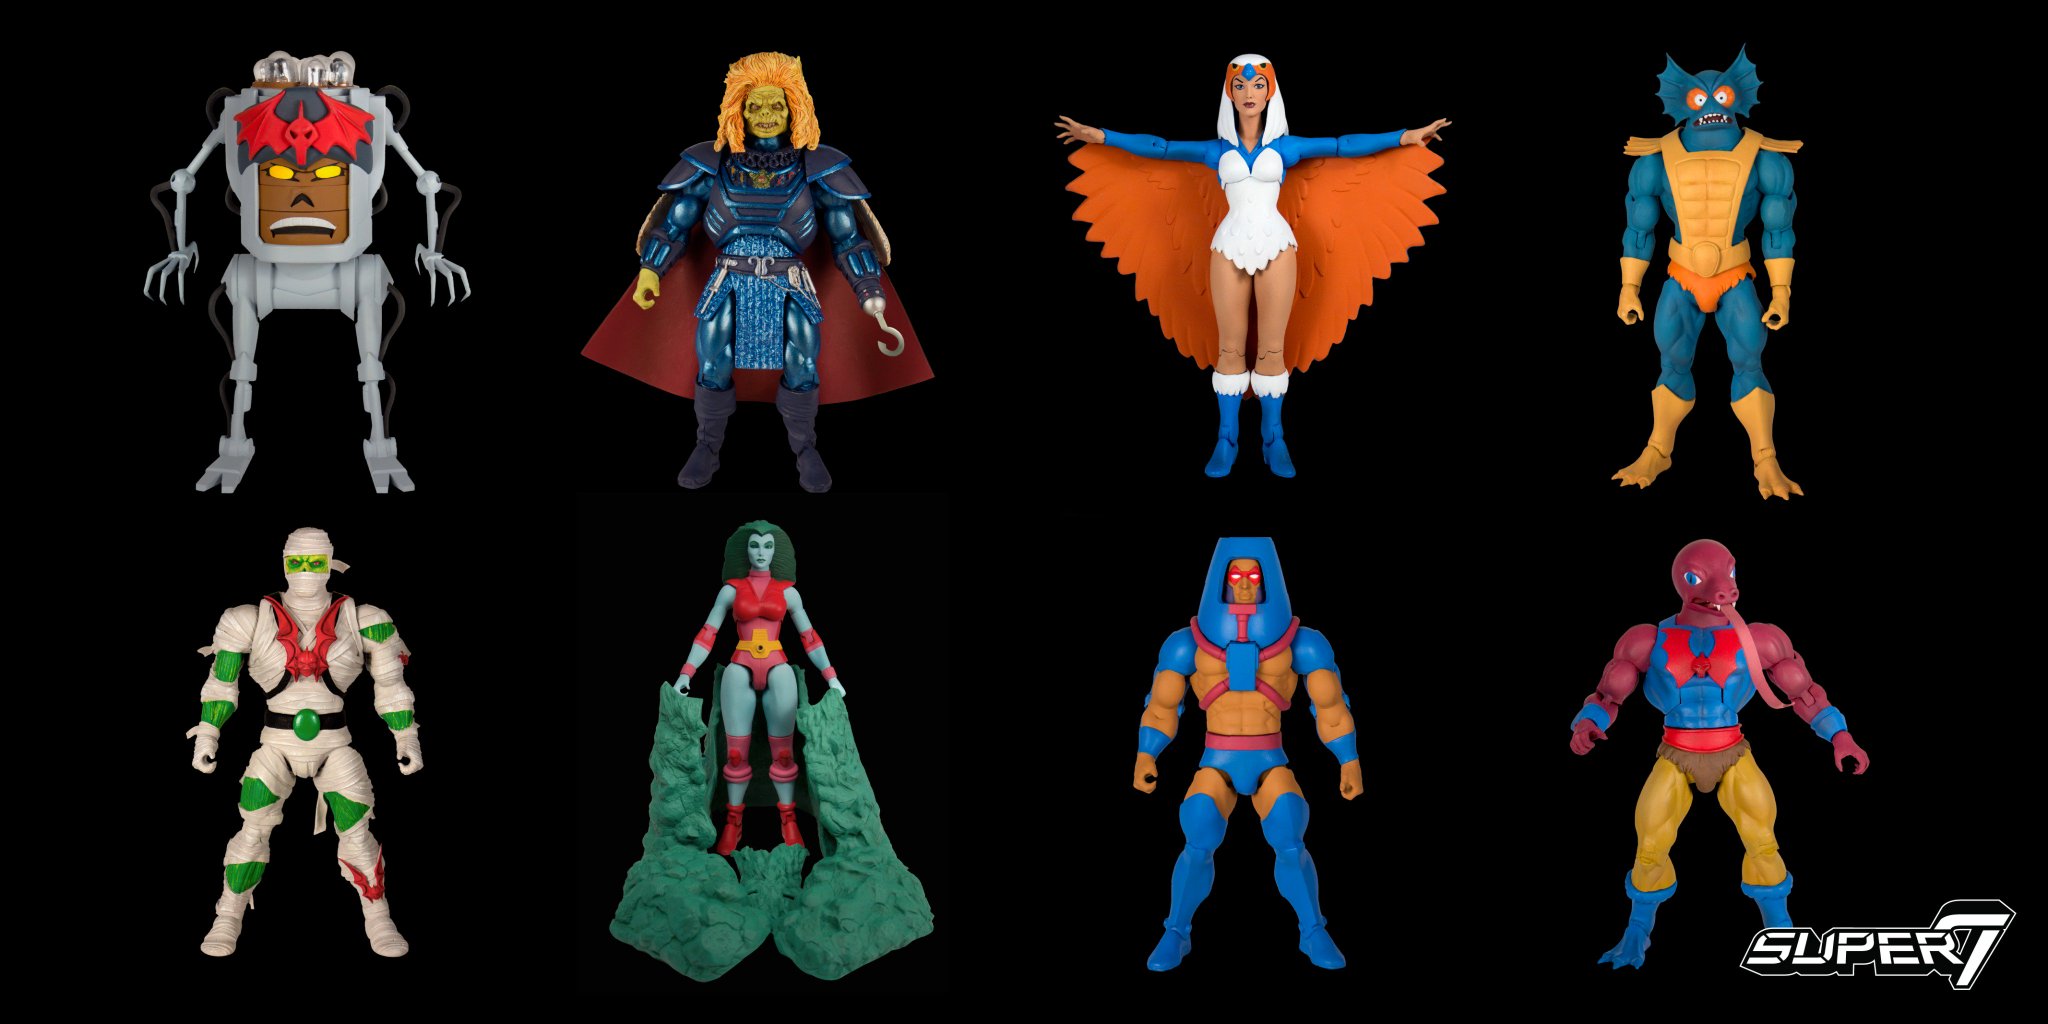 Super7 Our Motu Classics And Club Grayskull 7 Figures Continue With 8 New Characters The Pre Order Begins On 10 2 At T Co Hajp6jao4r T Co Mu6r12zkbi